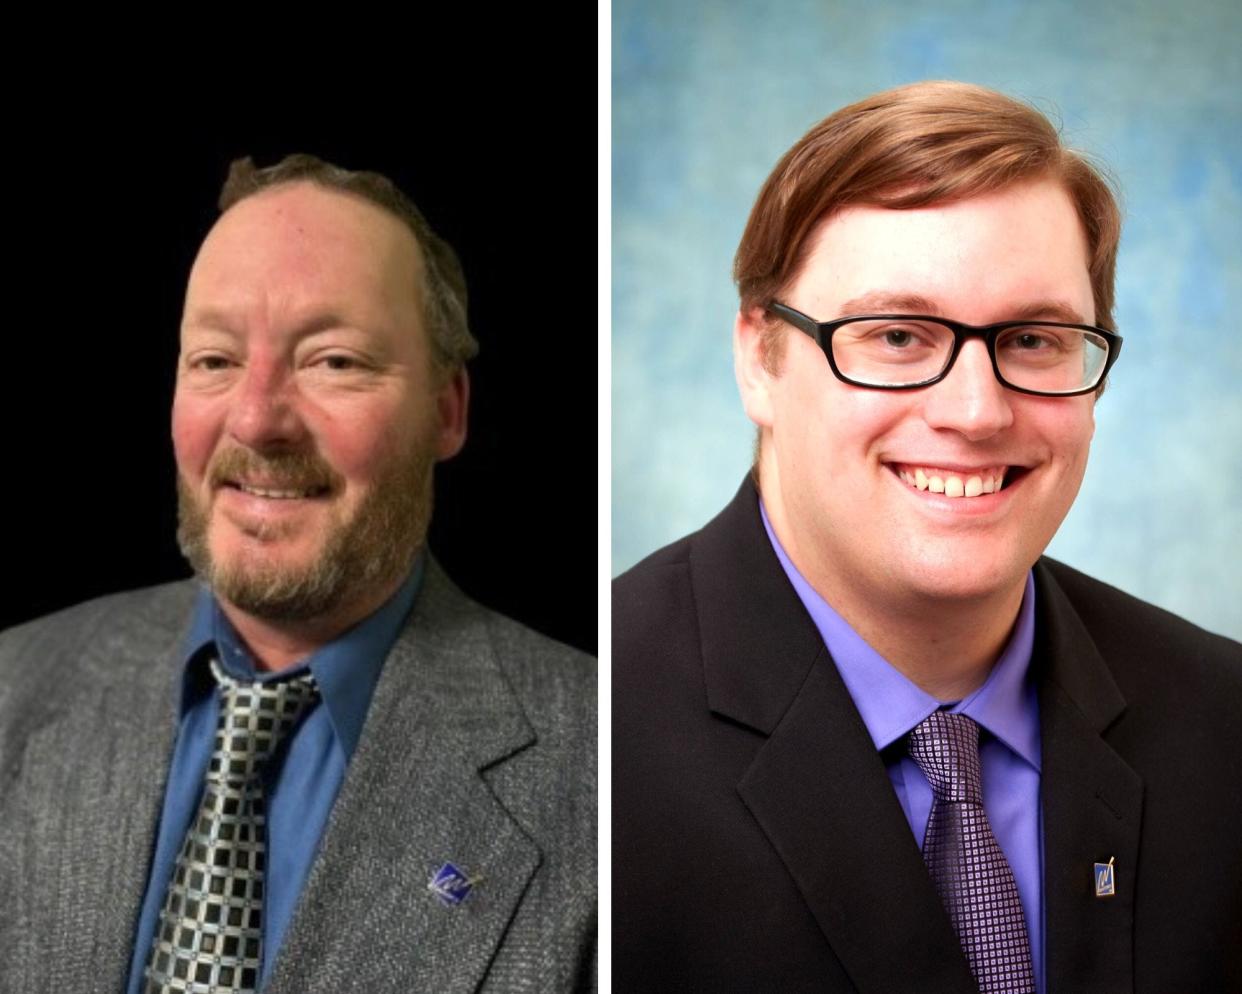 Raymond Geigel (left) and Brett Vanderkin are running for the District 1 seat on the Manitowoc Common Council.